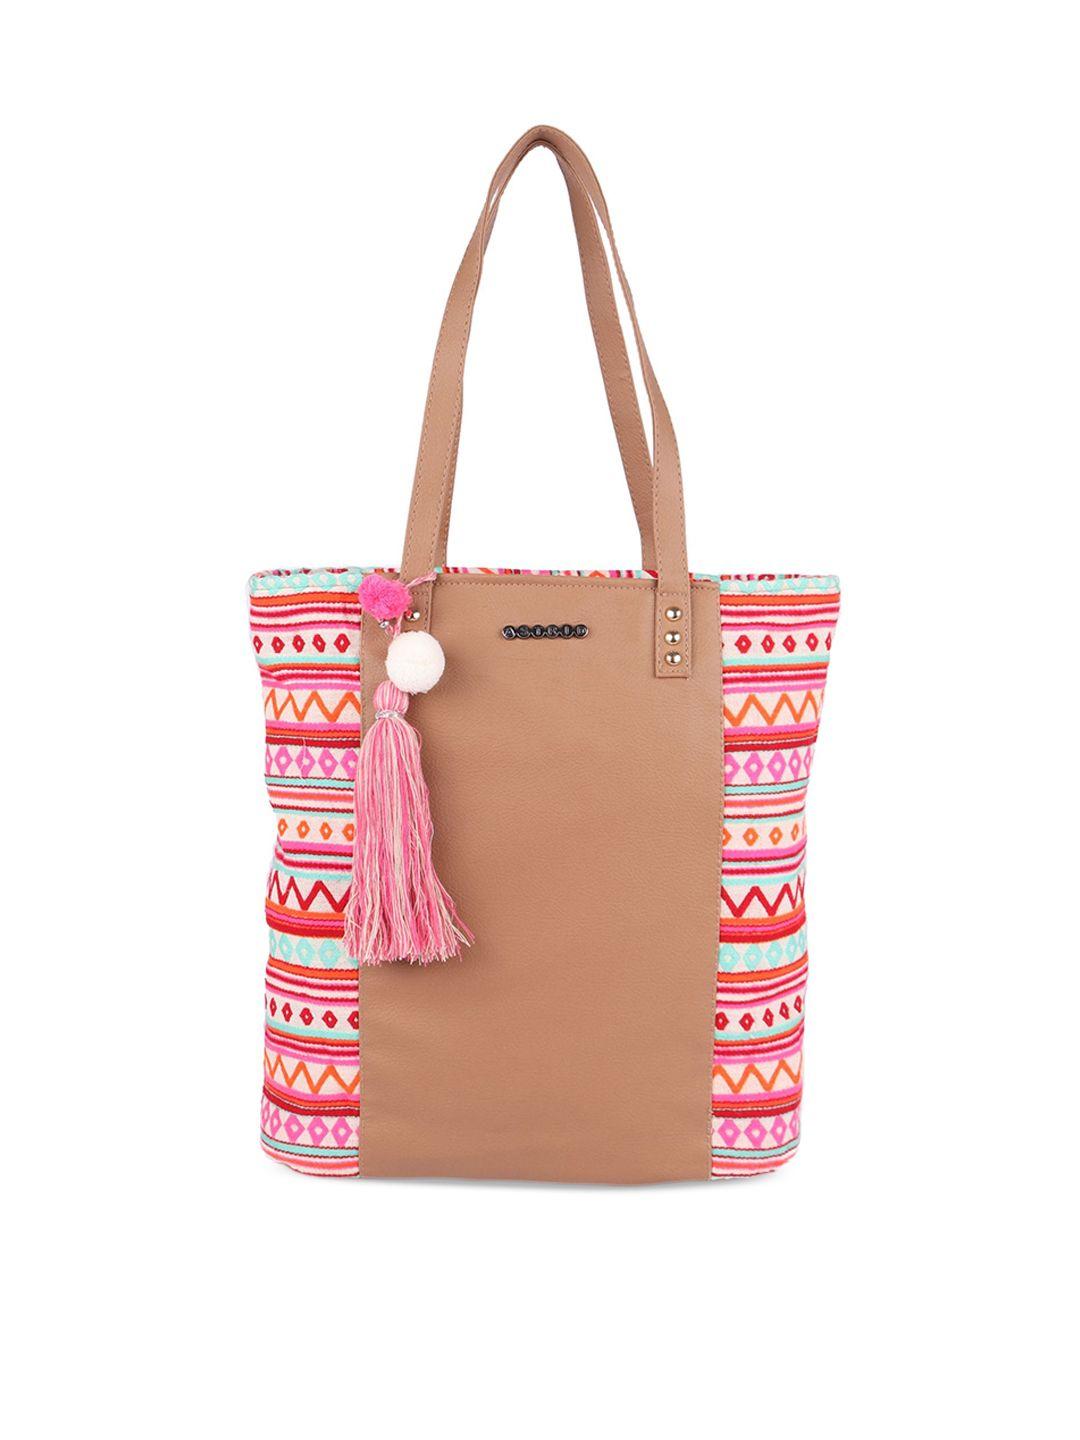 astrid oversized shopper tote bag with tasselled